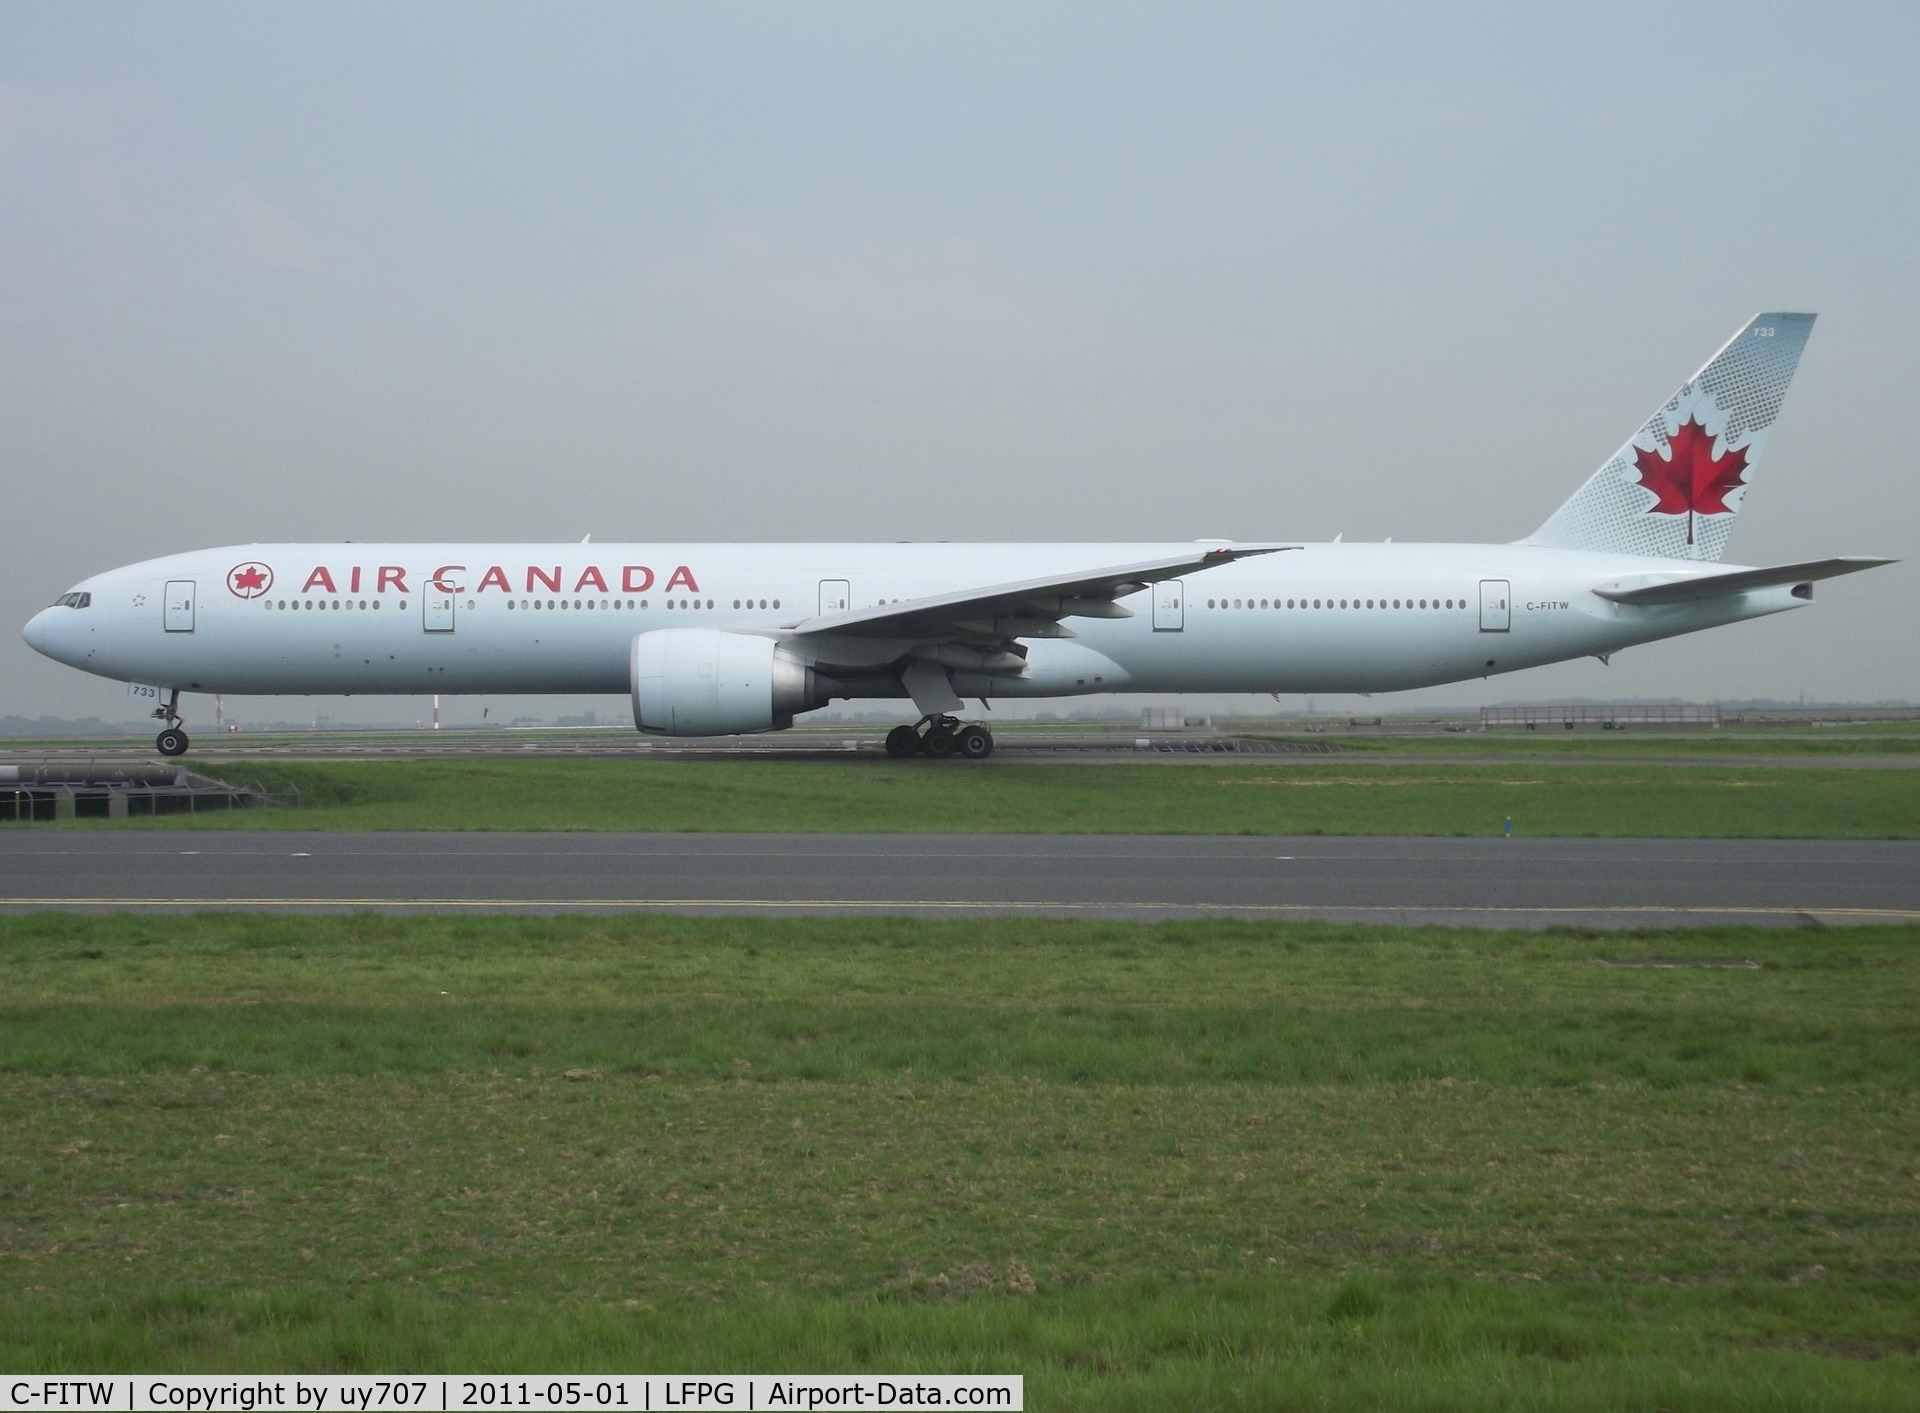 C-FITW, 2007 Boeing 777-333/ER C/N 35298, On her way back to YYZ